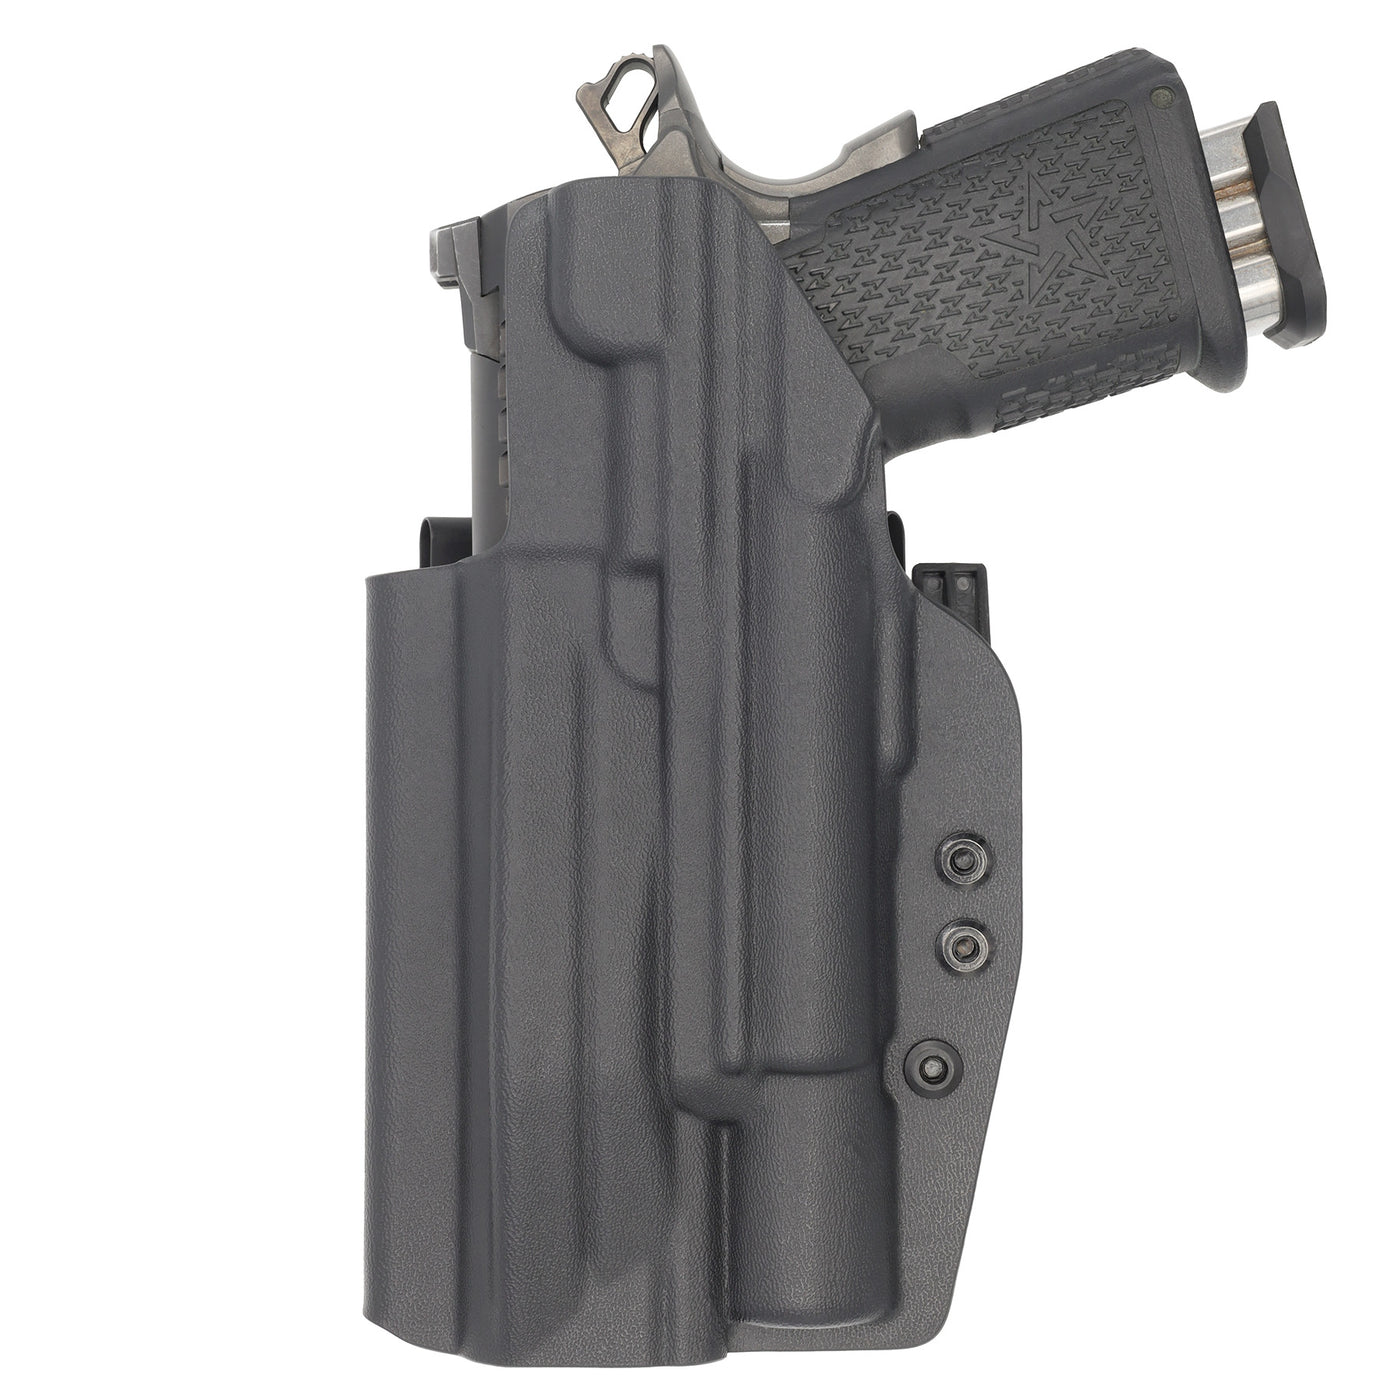 C&G Holsters Quickship IWB ALPHA UPGRADE Tactical 1911/2011 Surefire X300 in holstered position back view